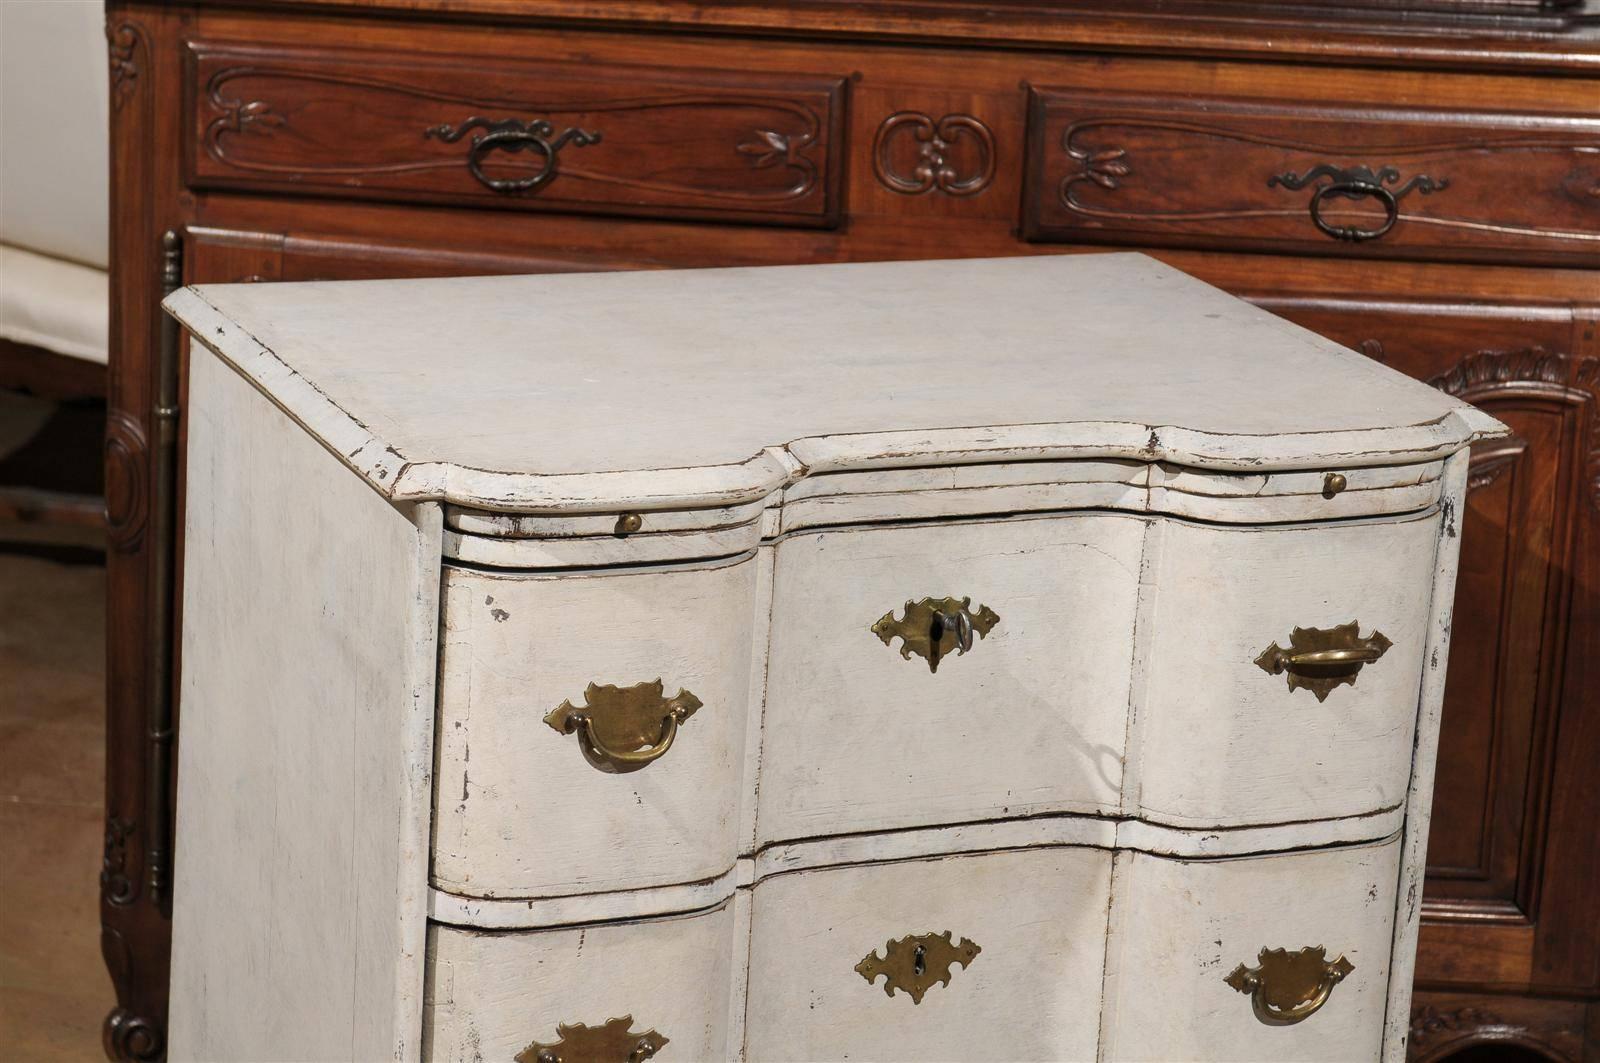 Danish Mid-18th Century Three-Drawer Painted Wood Commode with Serpentine Front For Sale 1